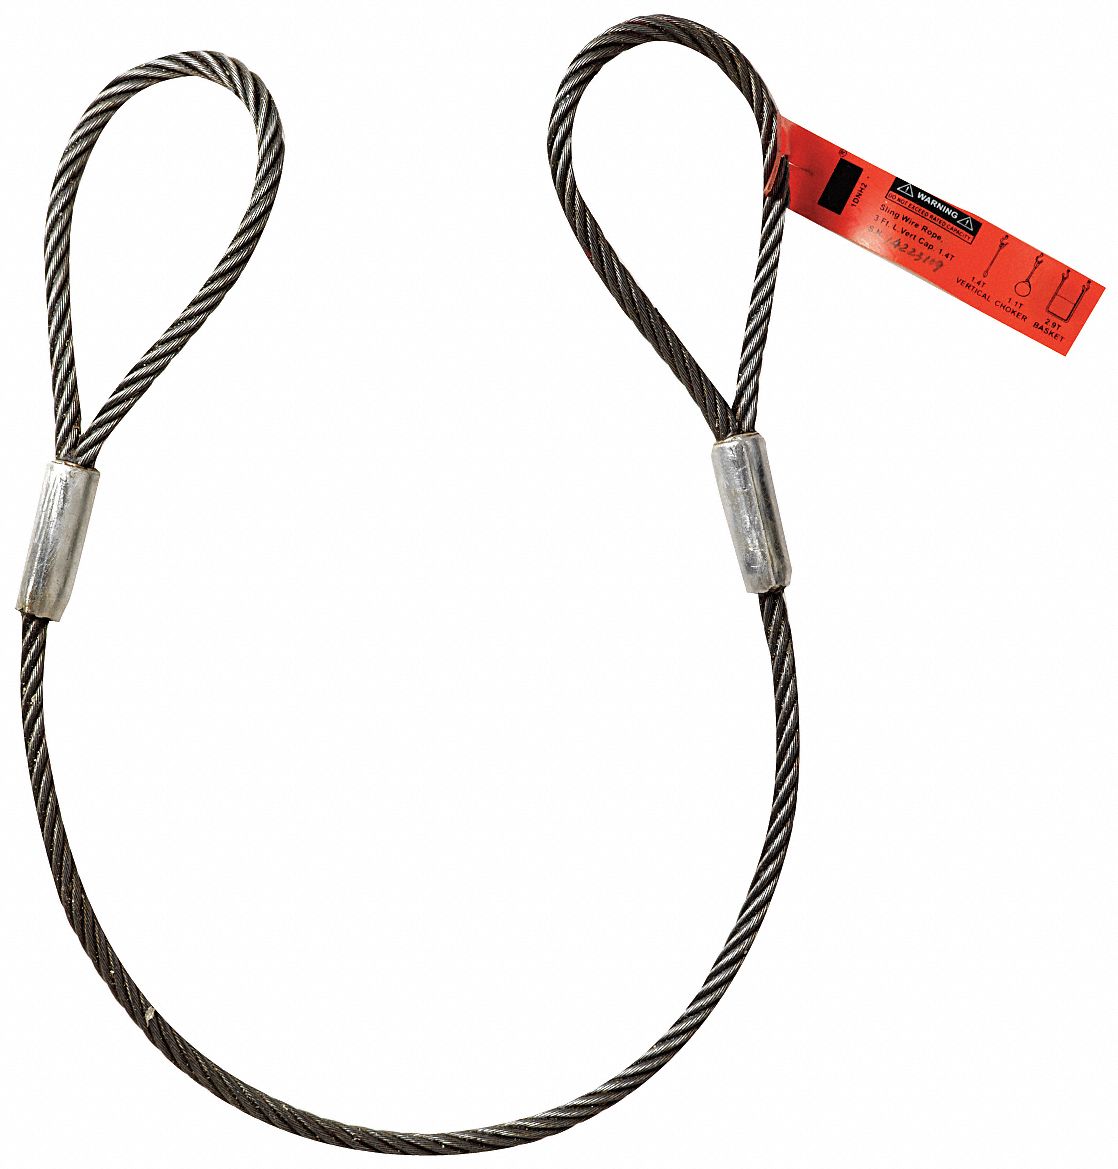 Wire rope choker slings with various working loads and lengths